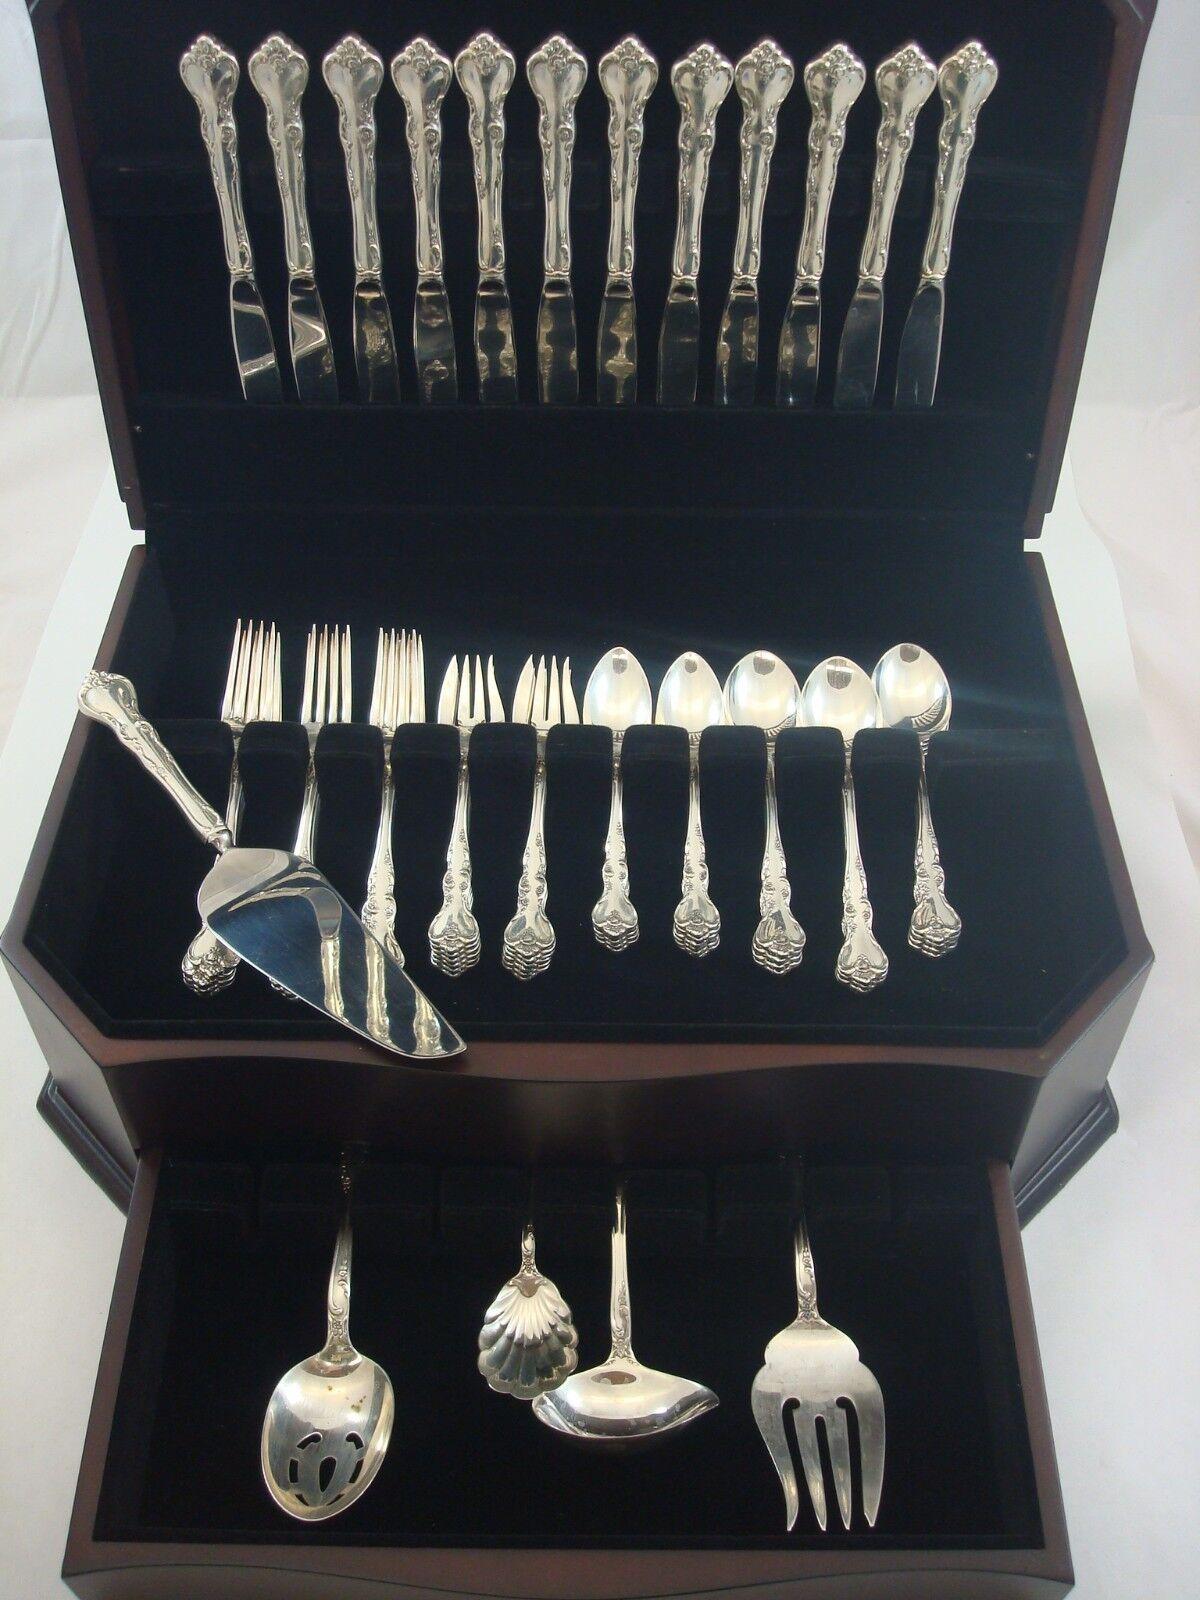 Savannah by Reed & Barton sterling silver flatware set - 65 pieces. This set includes:



12 knives, 9 1/8